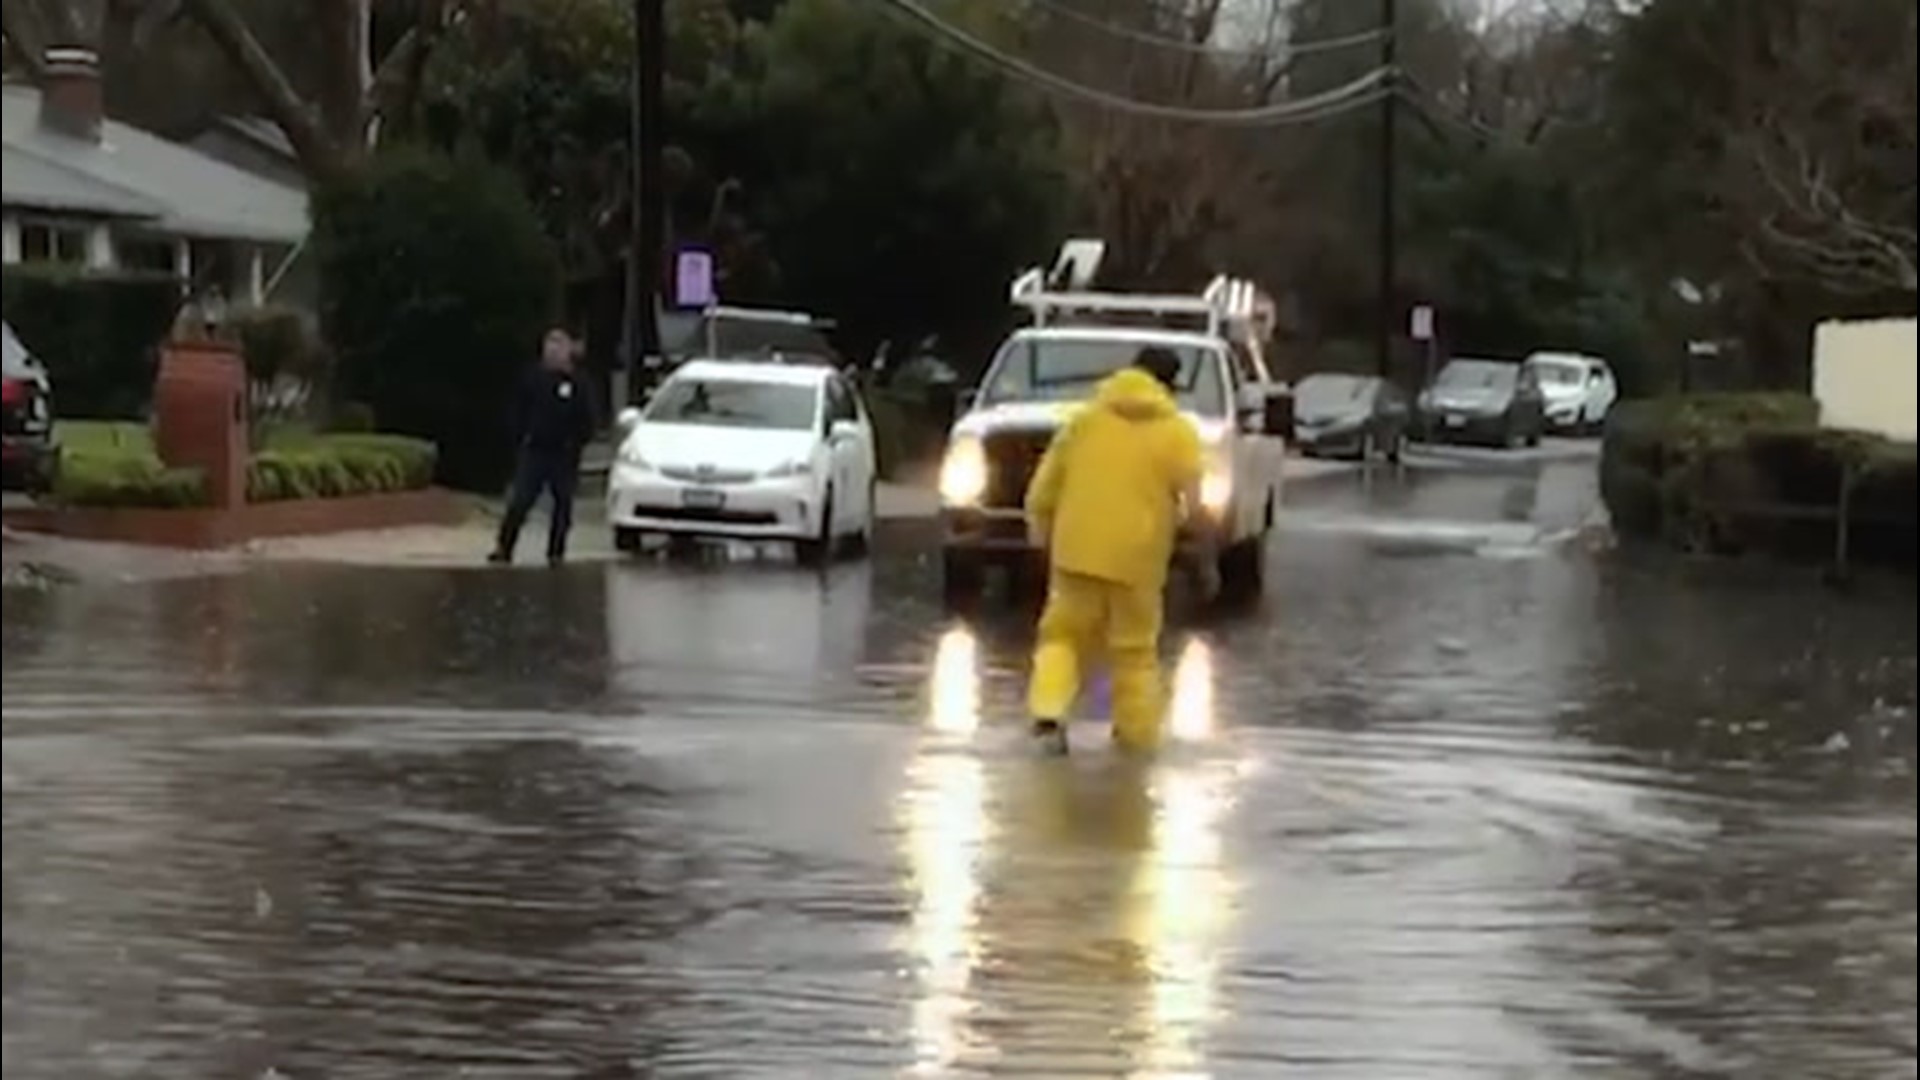 Part of a road in Danville, California, was forced to close on Jan. 16 due to extreme levels of rain that caused flooding.